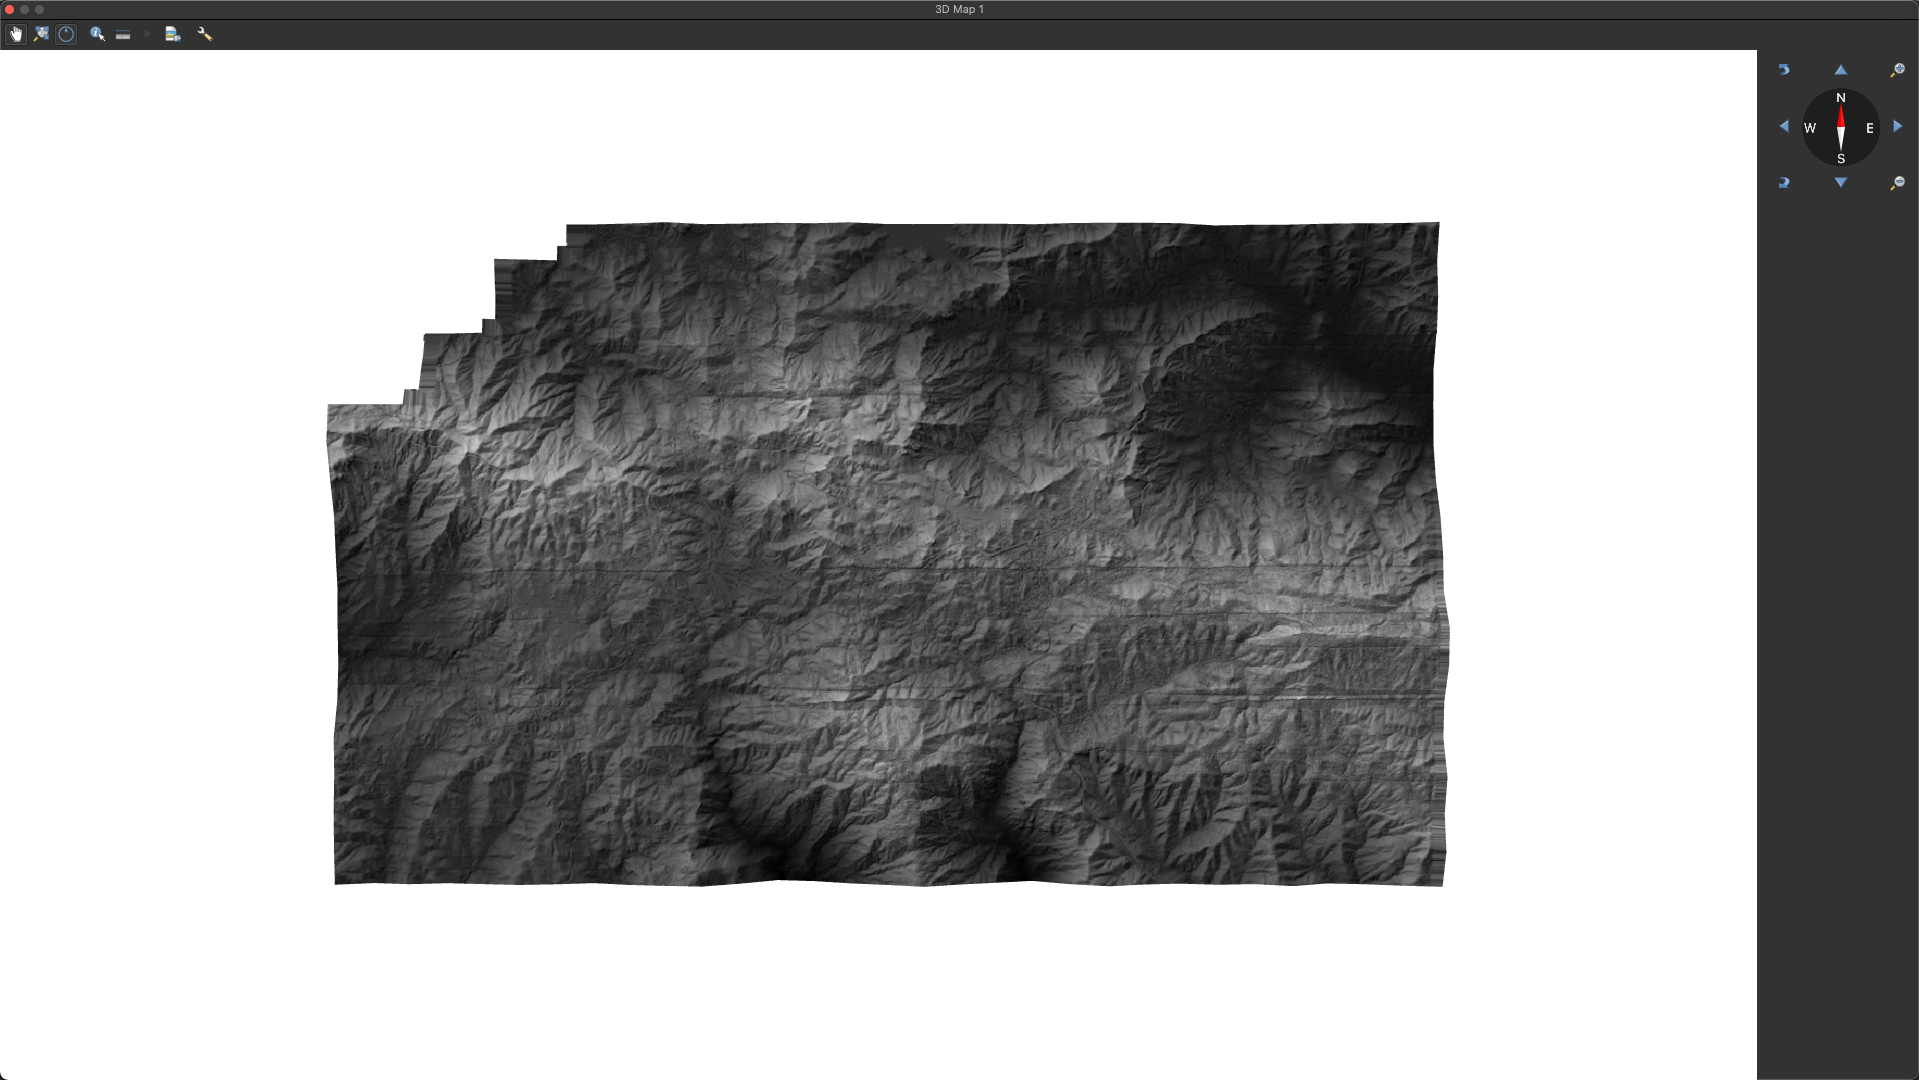 3D Map in QGIS - After Configuration